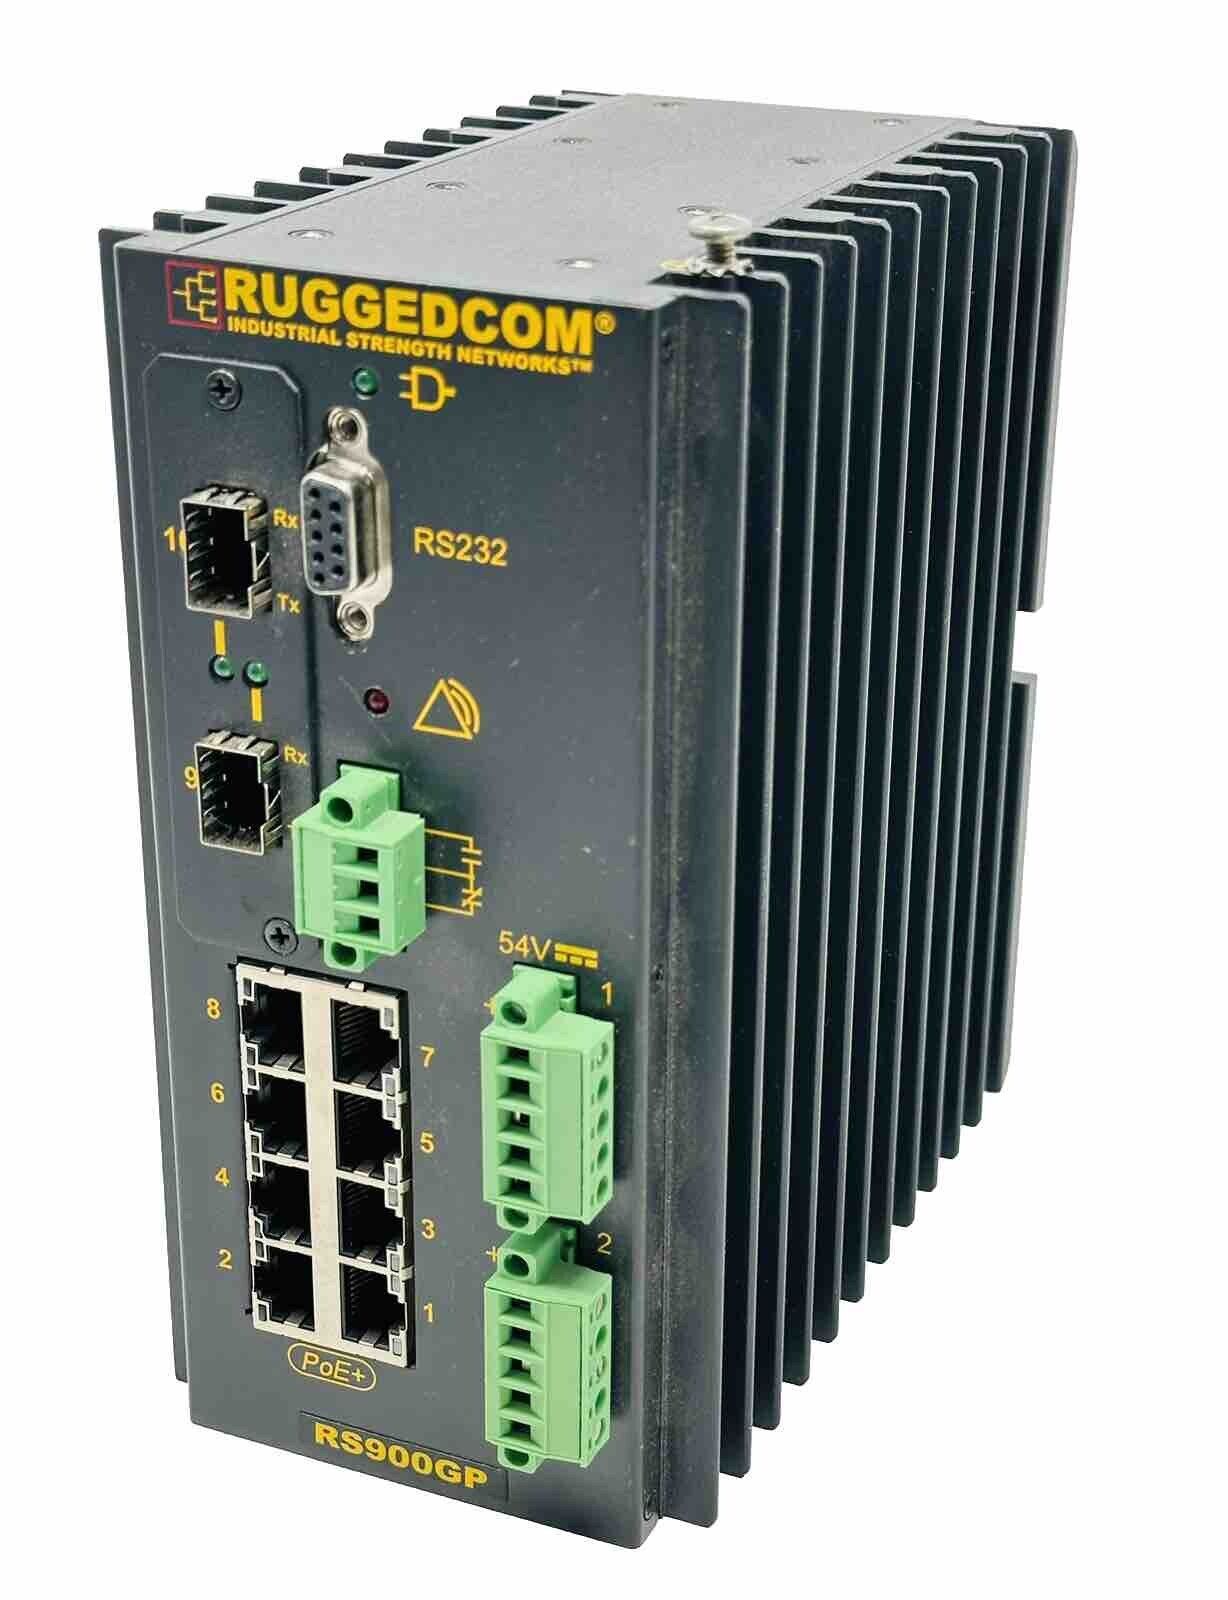 Siemens Ruggedcom RS900GP-D-FG50-XX Hardened Industrial POE Switch Managed RS232